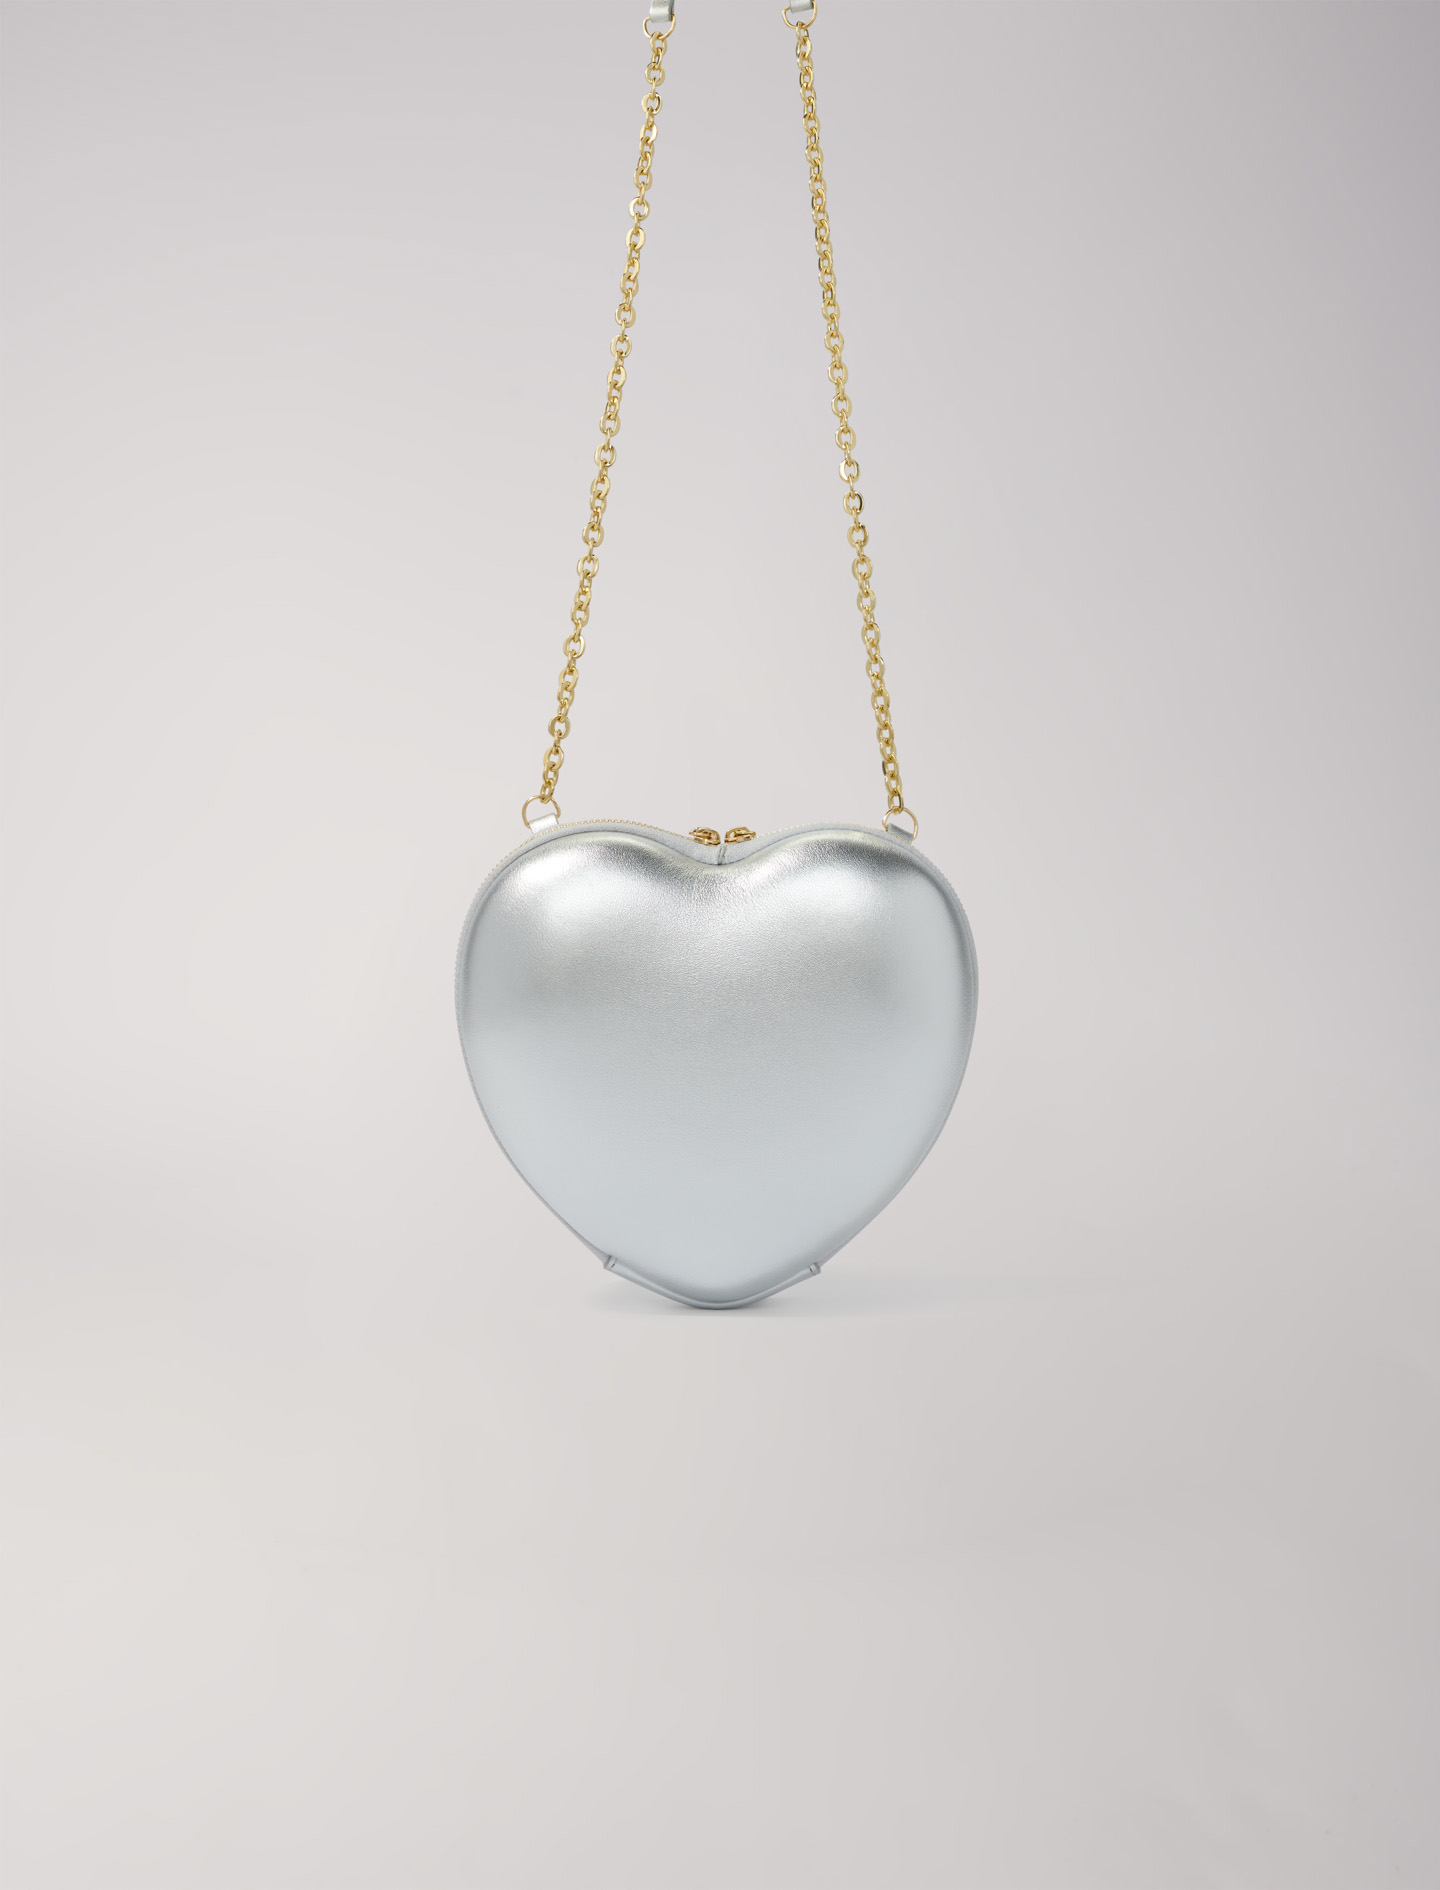 Mixte's cotton Chain: Heart-shaped leather bag for Spring/Summer, size Mixte-All Bags-OS (ONE SIZE), in color Silver / Grey